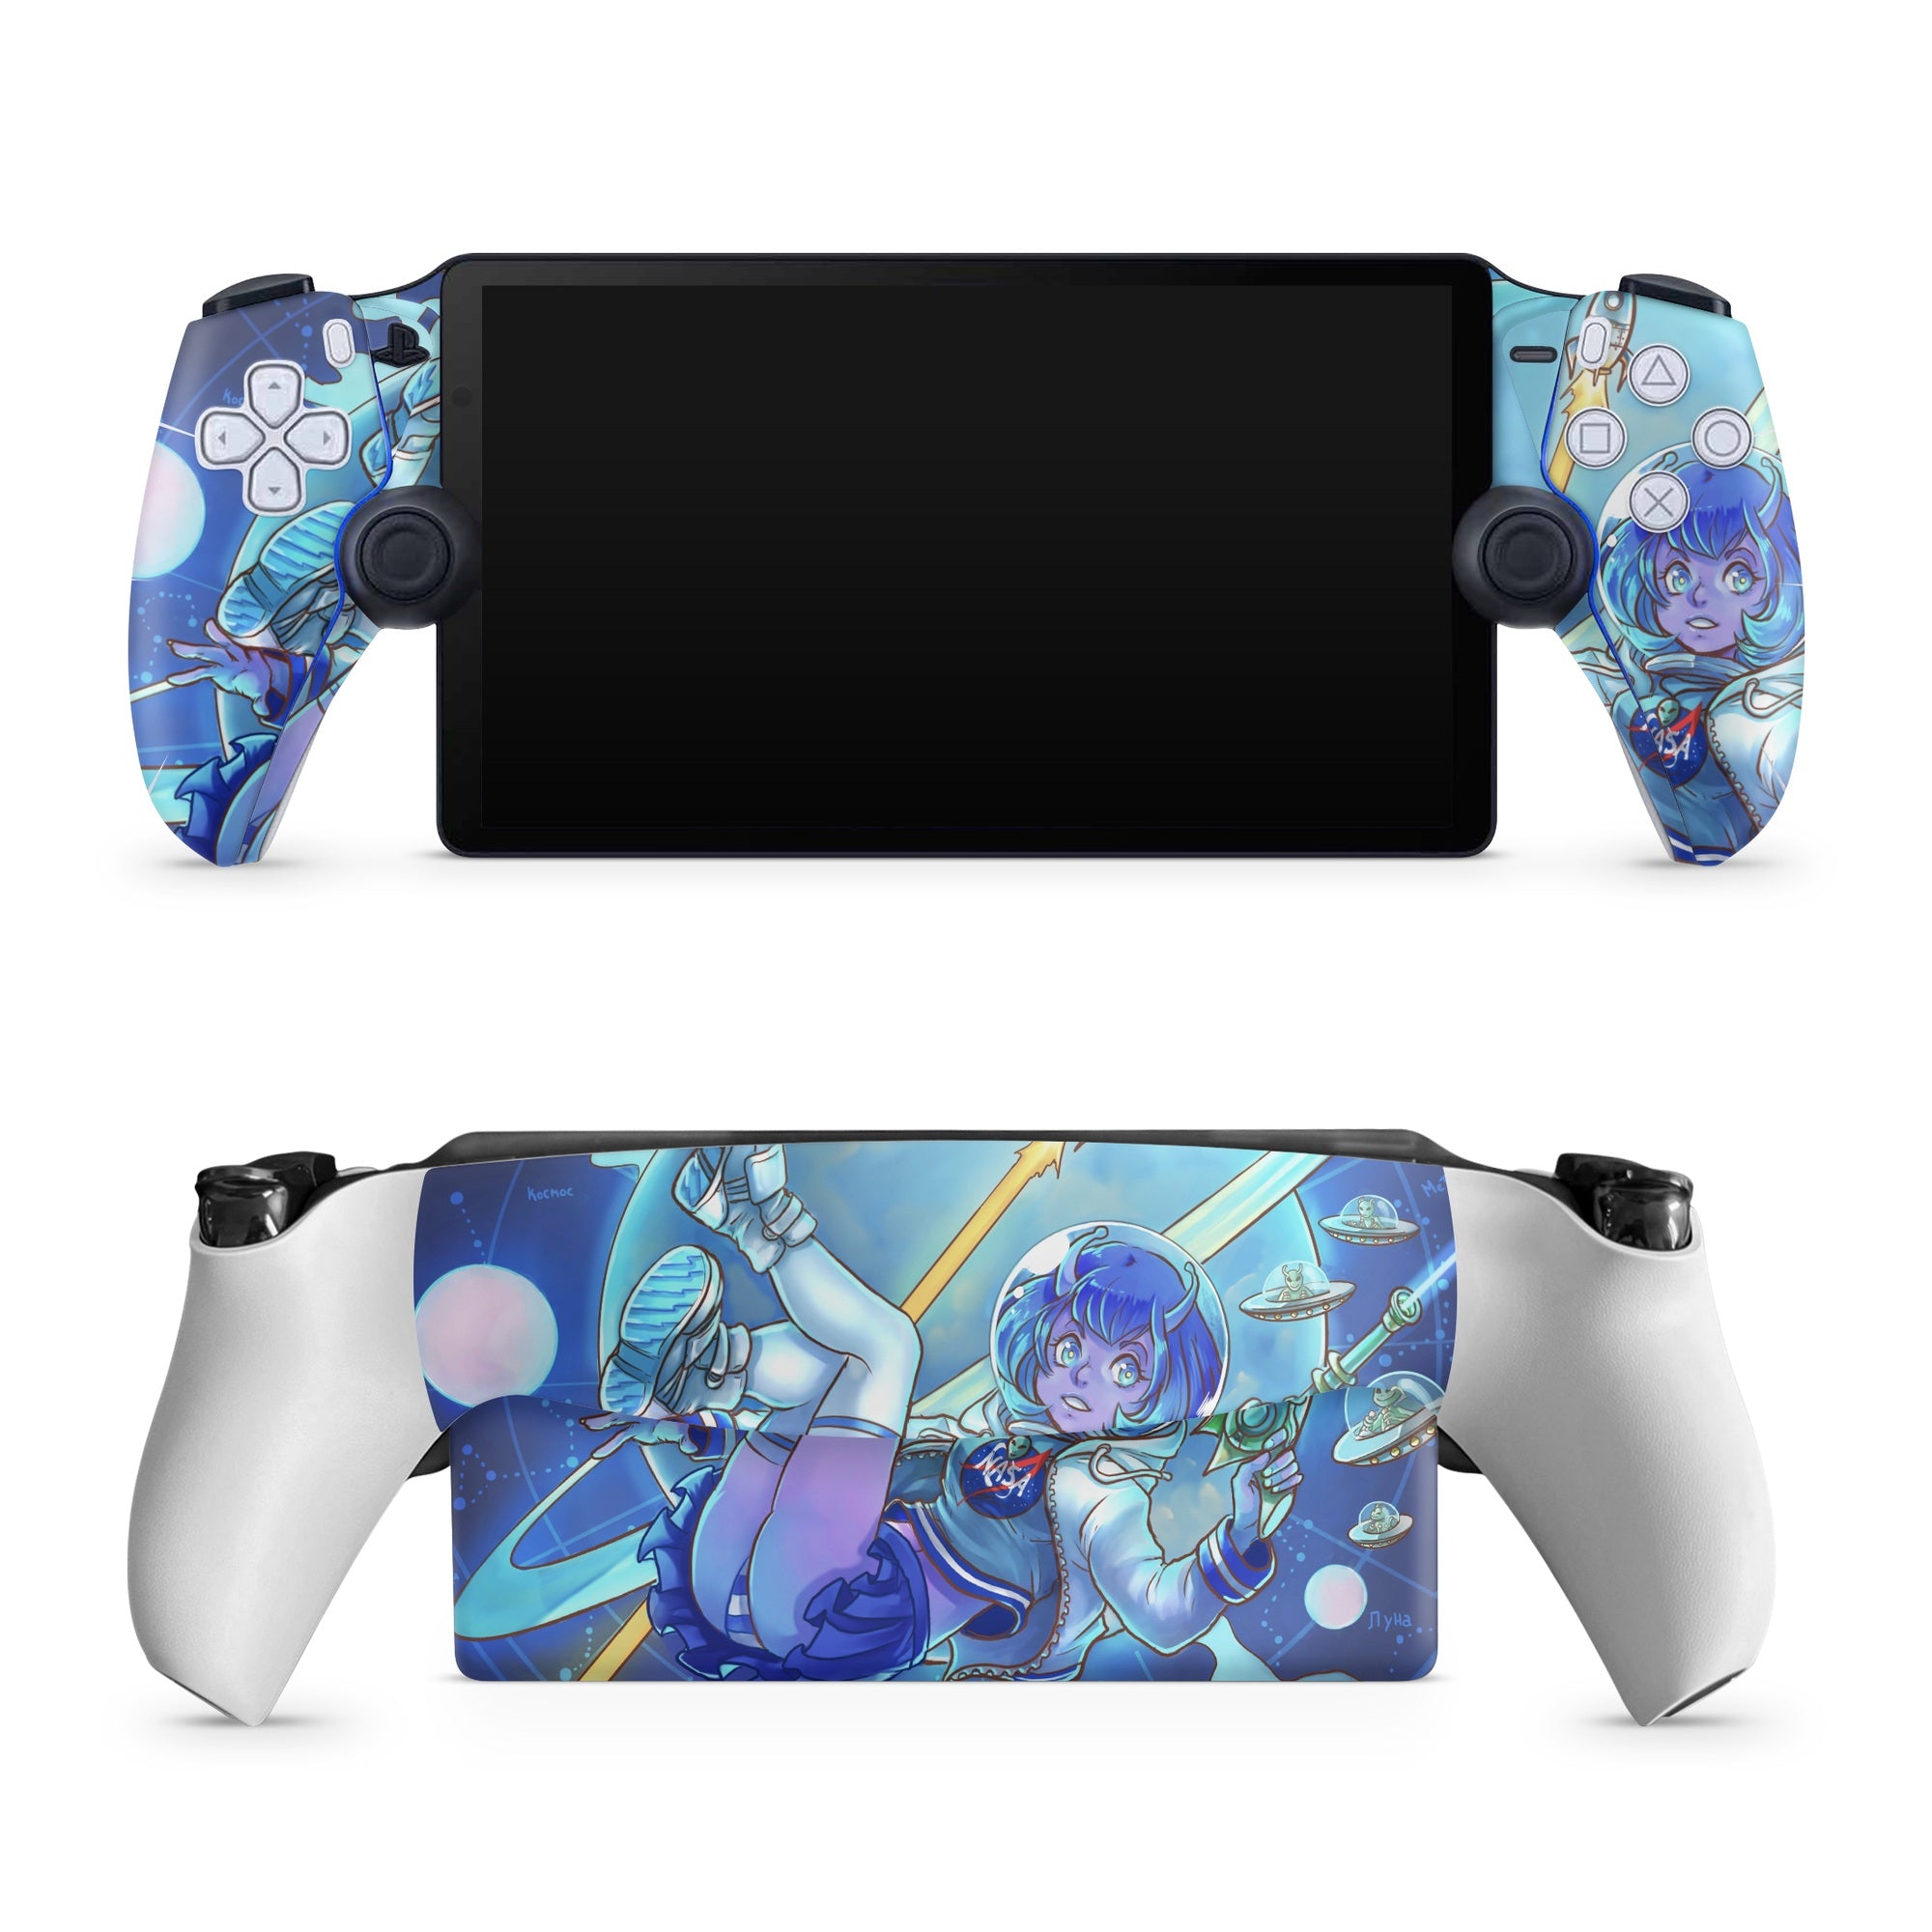 We Come in Peace - Sony PlayStation Portal Skin